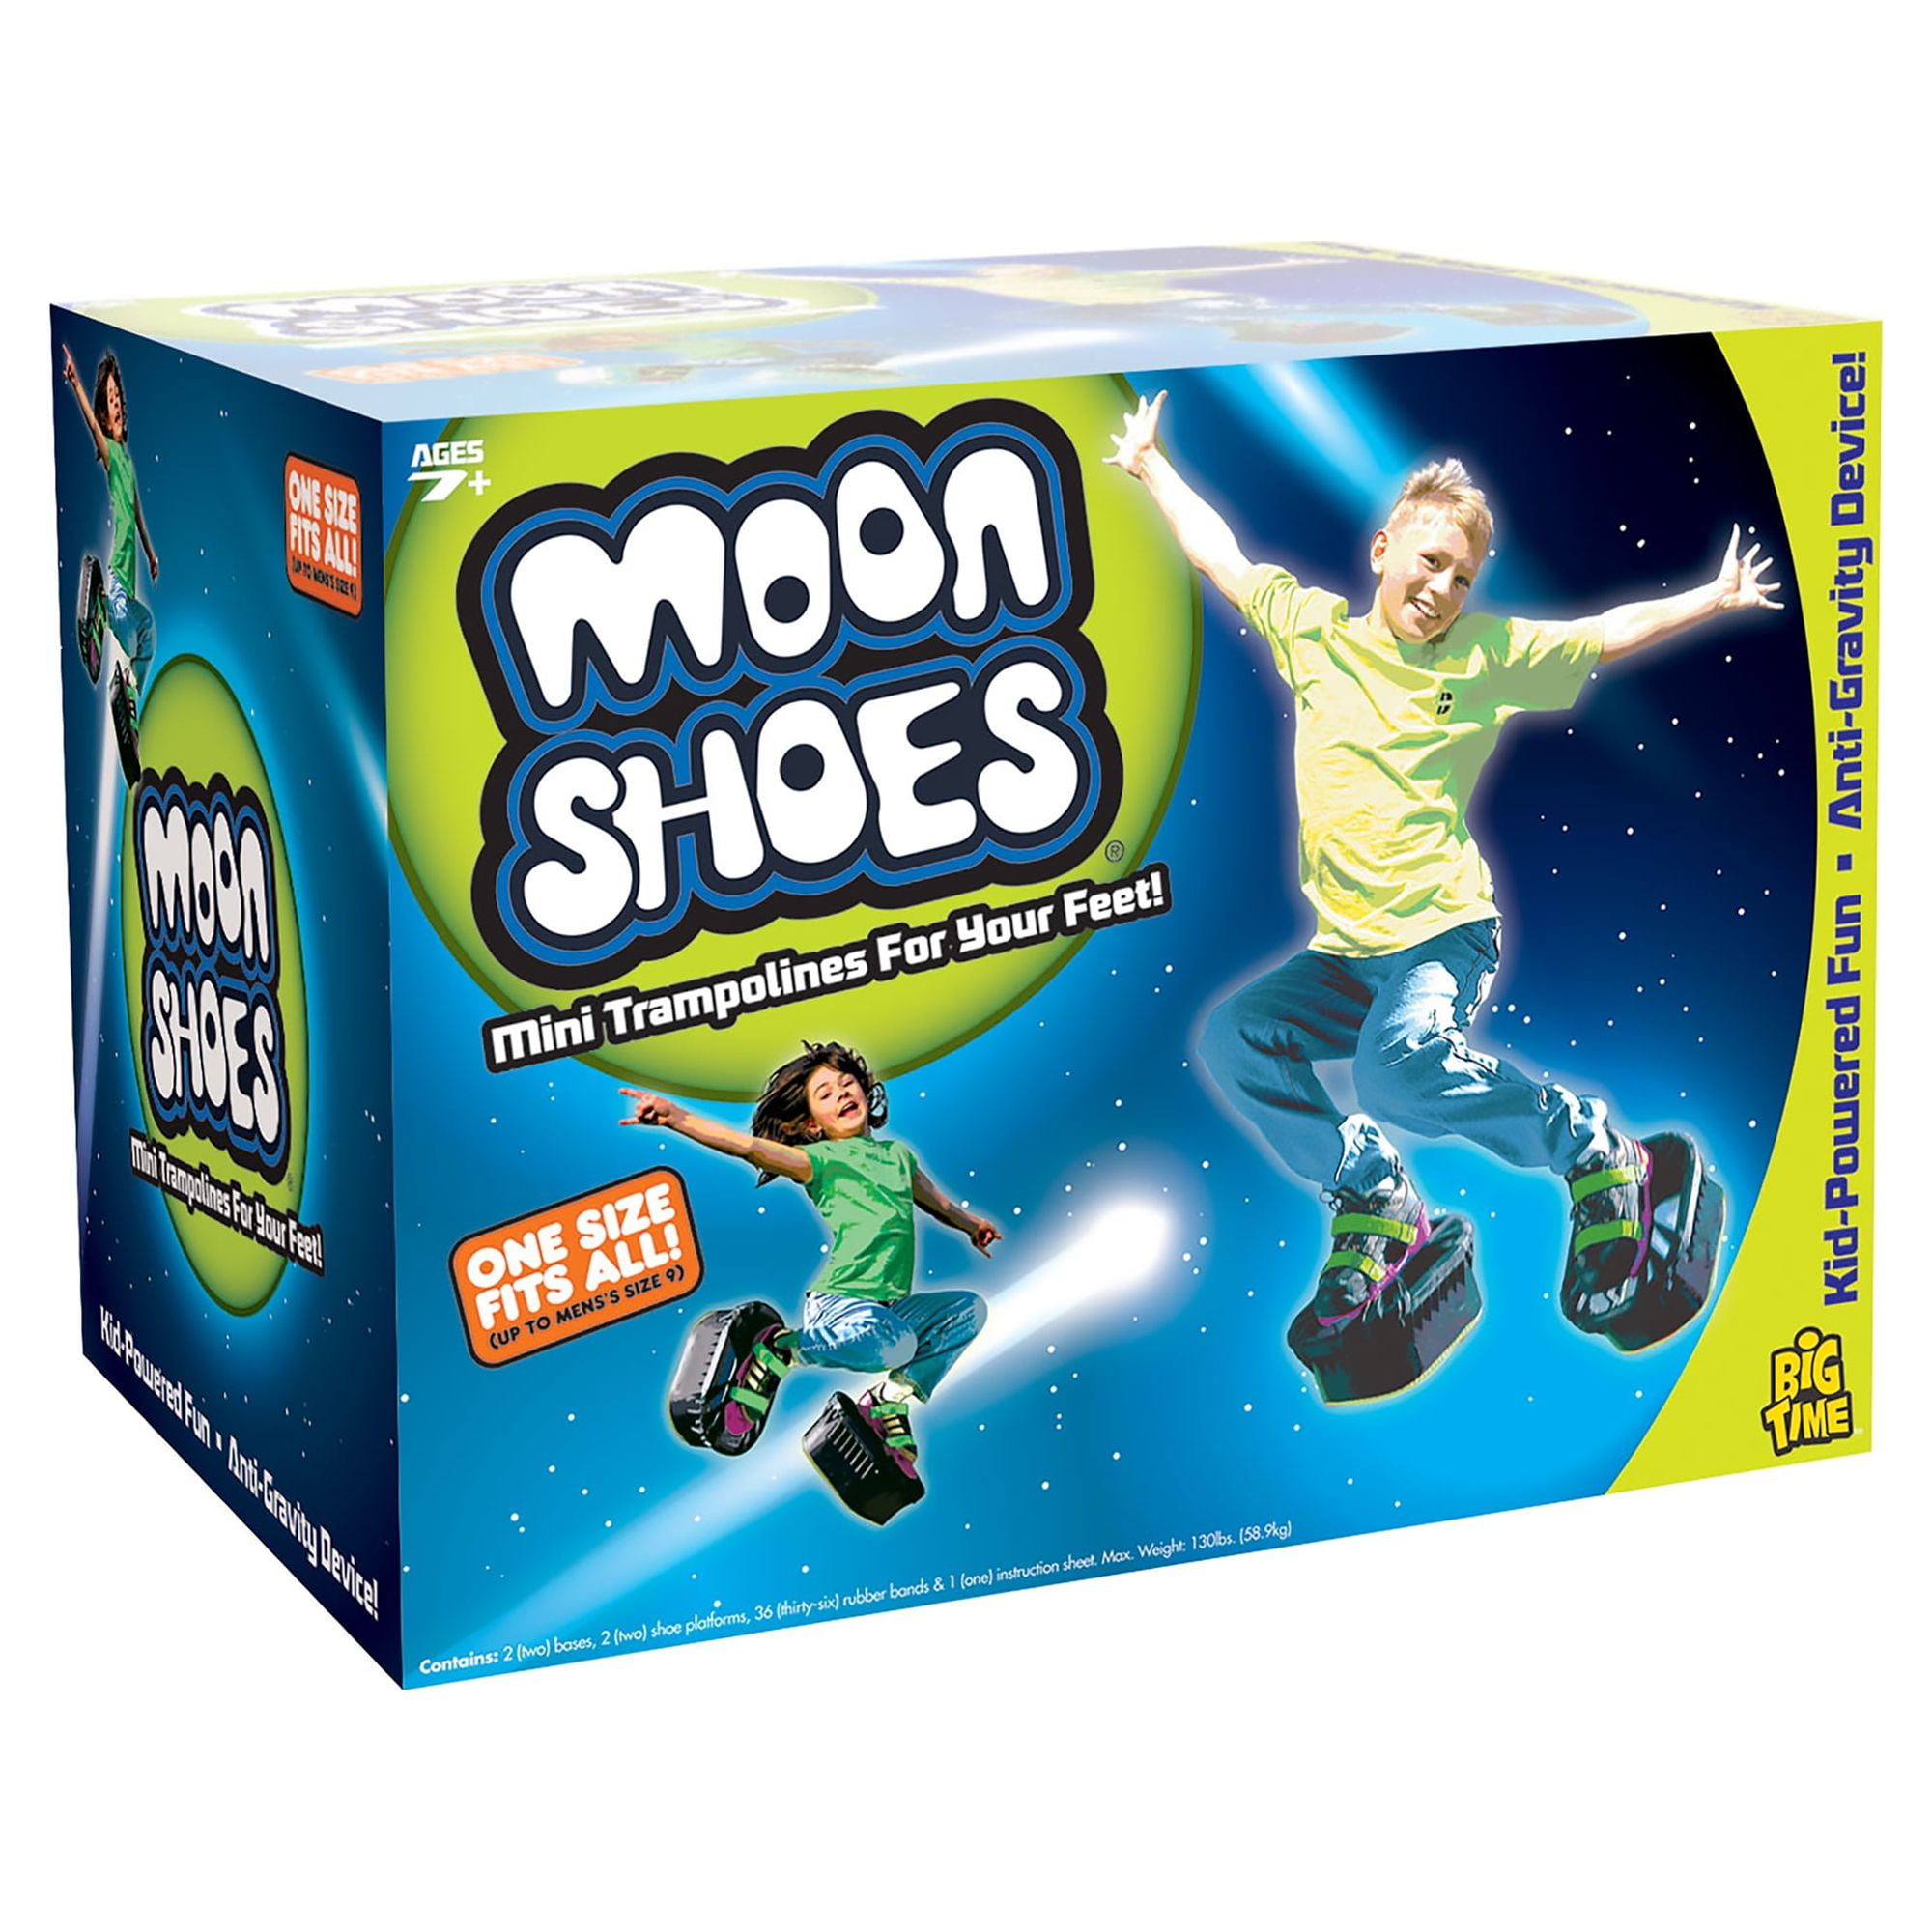 MOON SHOES 1989 Trampoline Boots // AMAZING Neon Fun // Toy